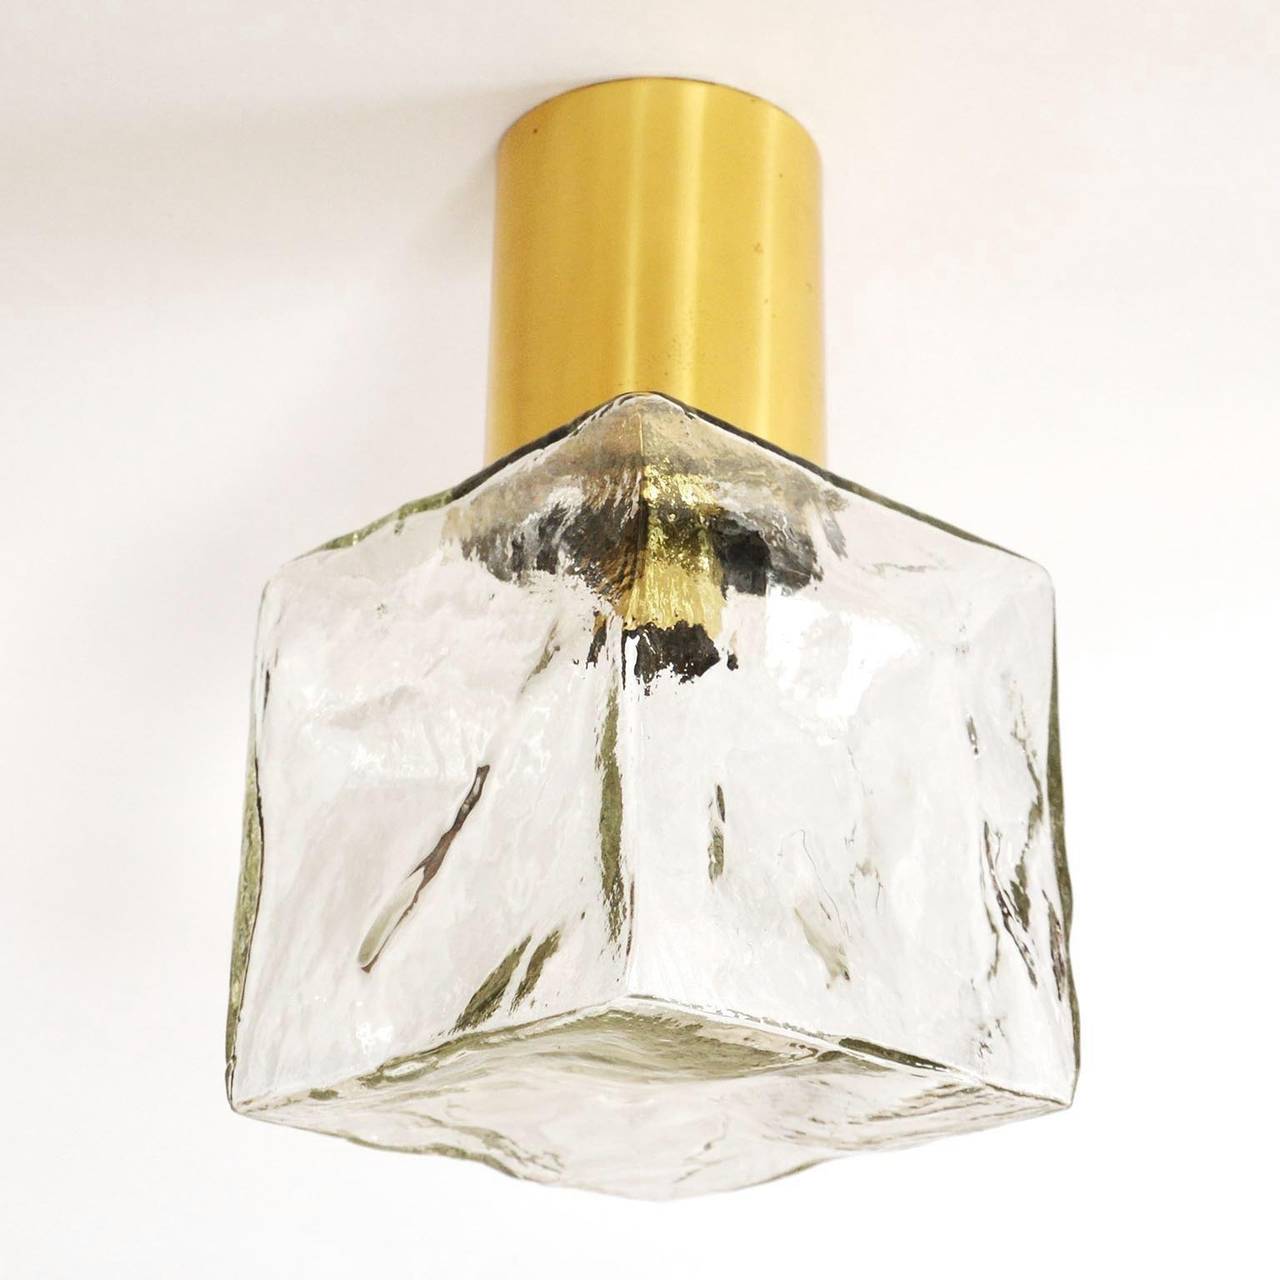 Nice brass and frosted glass light fixture by Kalmar, manufactured in Mid-Century, circa 1970 (late 1960s or eraly 1970s). One bulb E26 / E27 for 75W max.